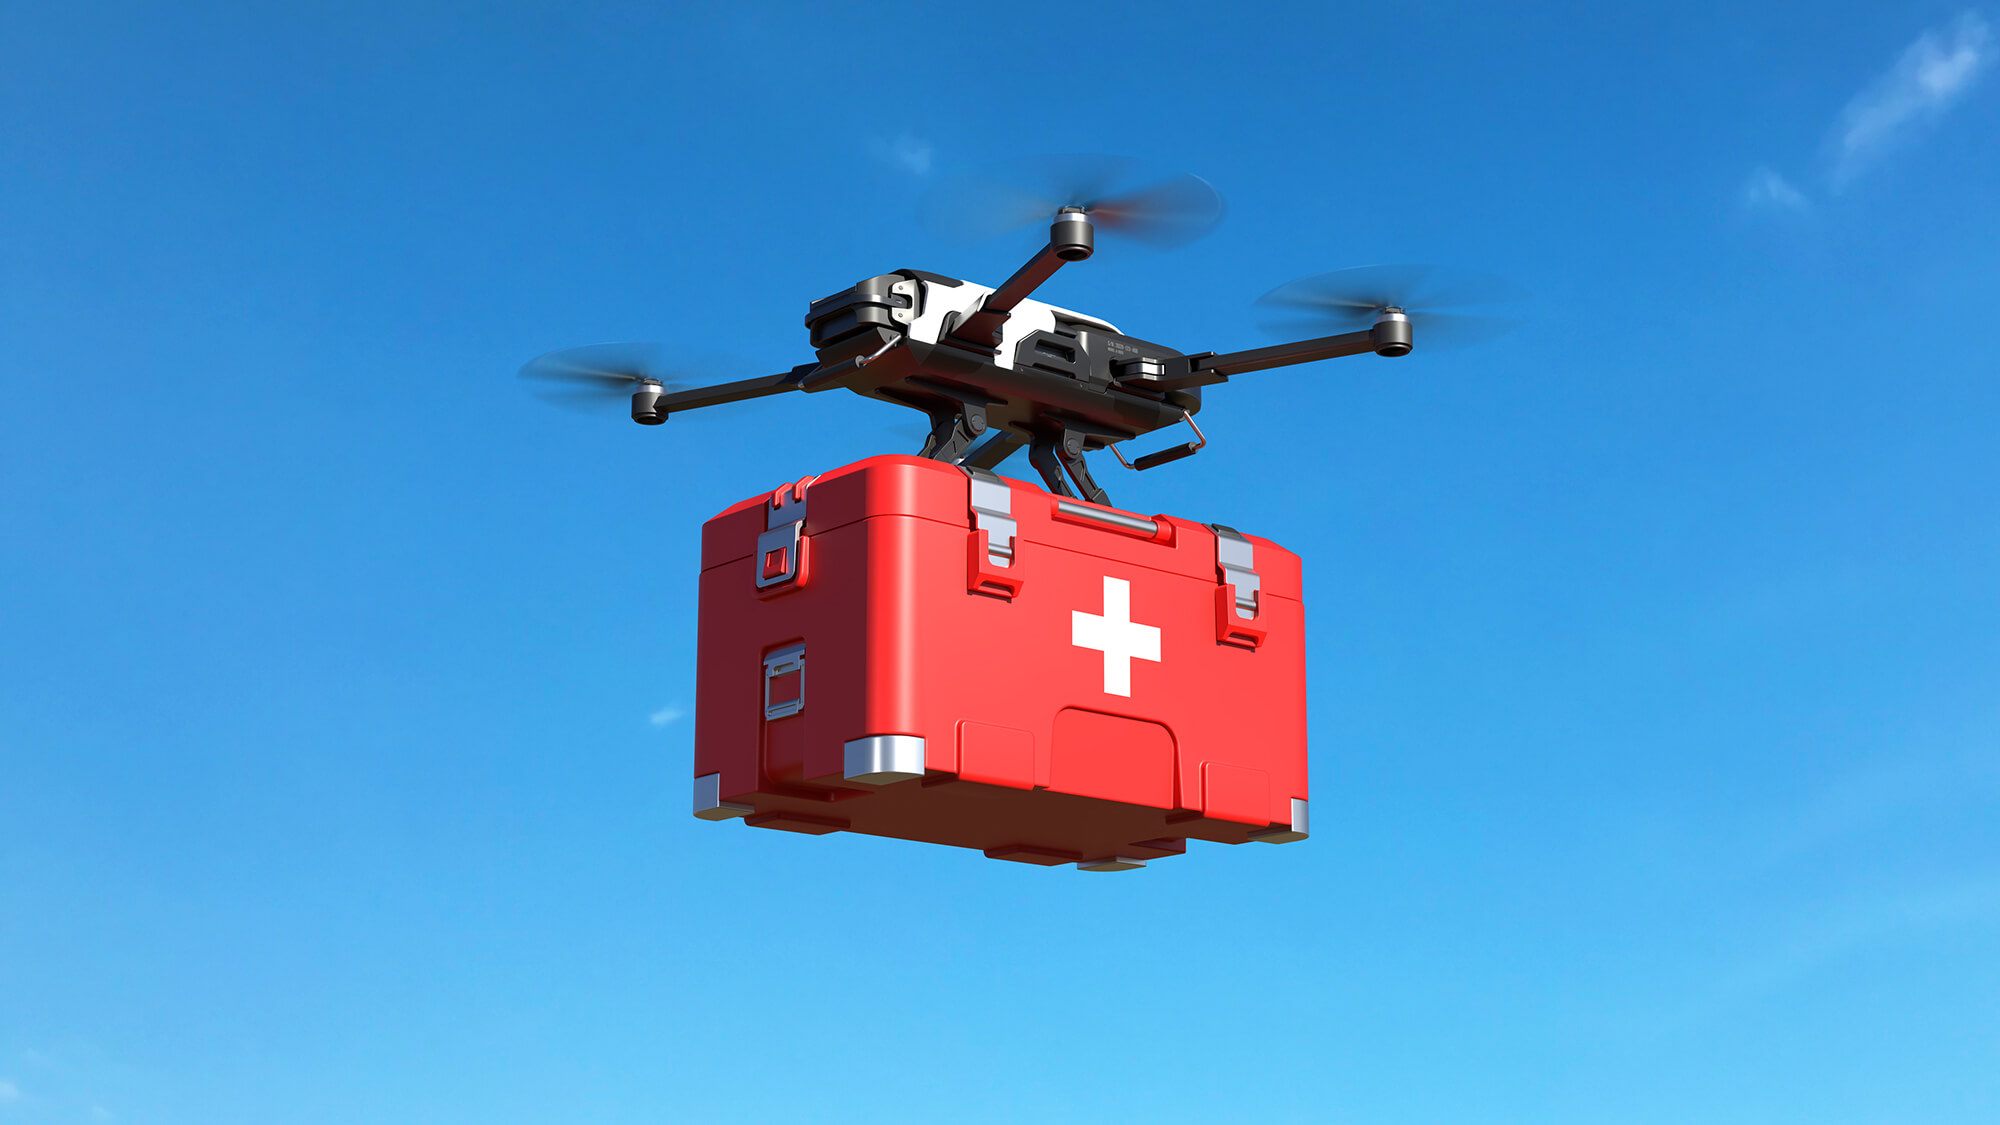 Iris Automation | What Is an Ambulance Drone?